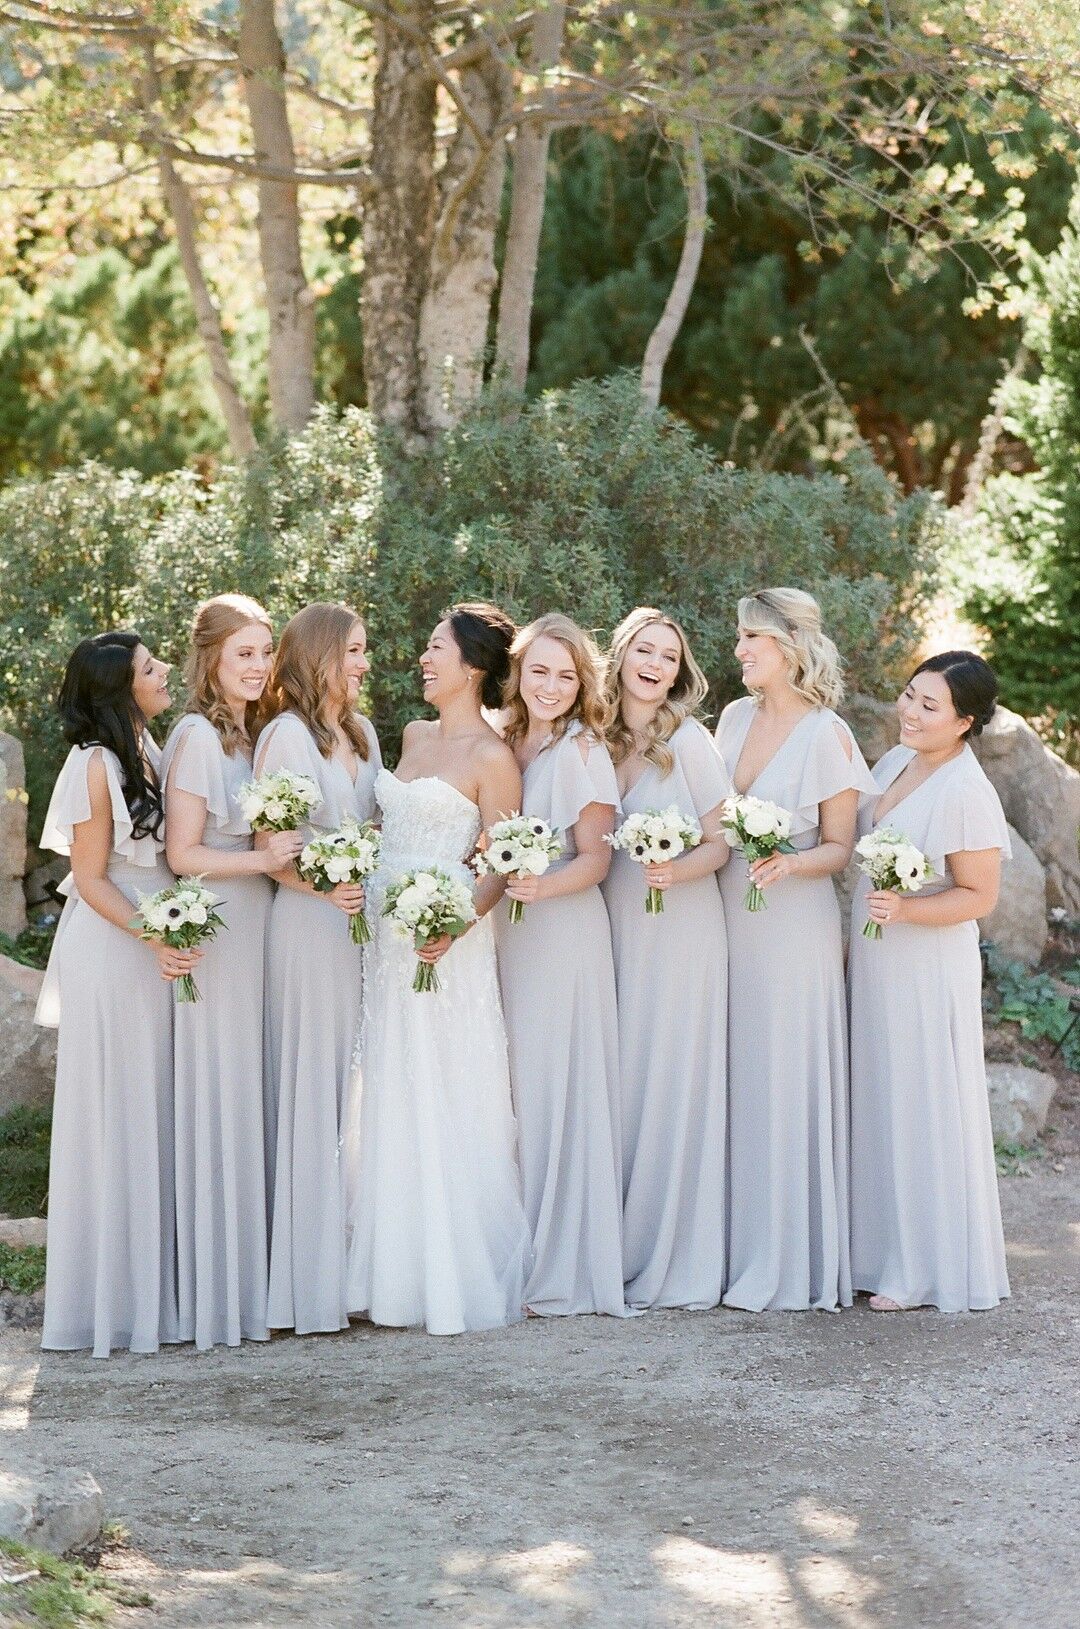 Classic Bridesmaids with Long Gray Dresses and White Bouquets